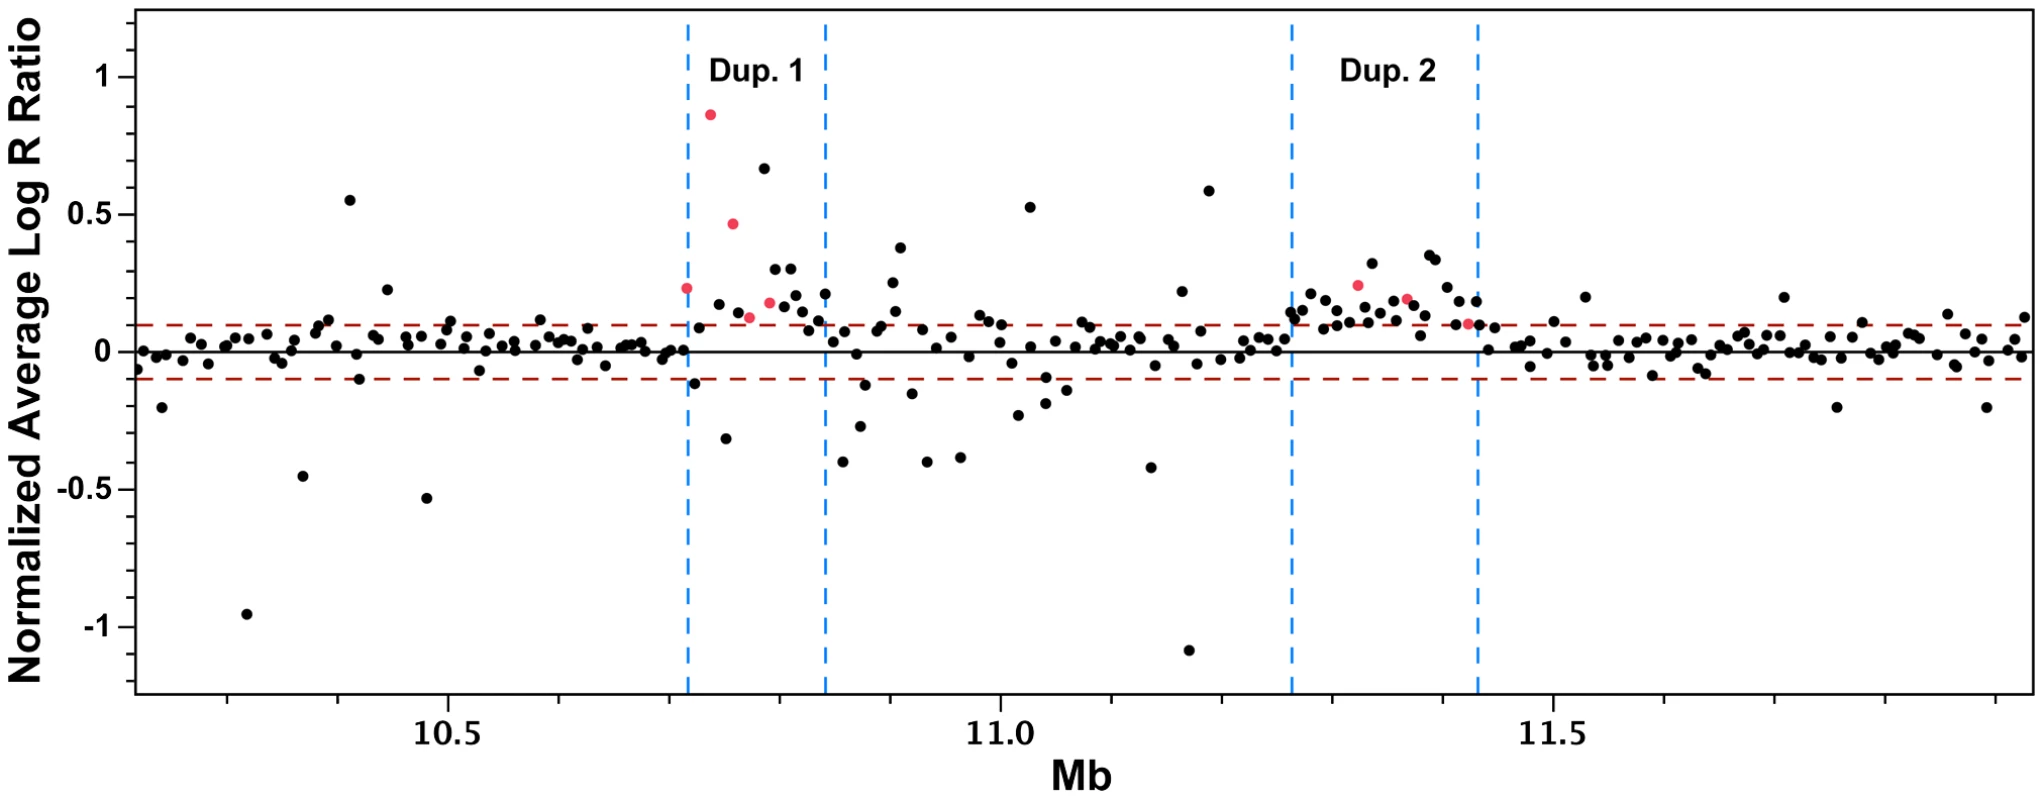 Group-wise analysis of Log R ratio SNP data for the detection of copy number variations.